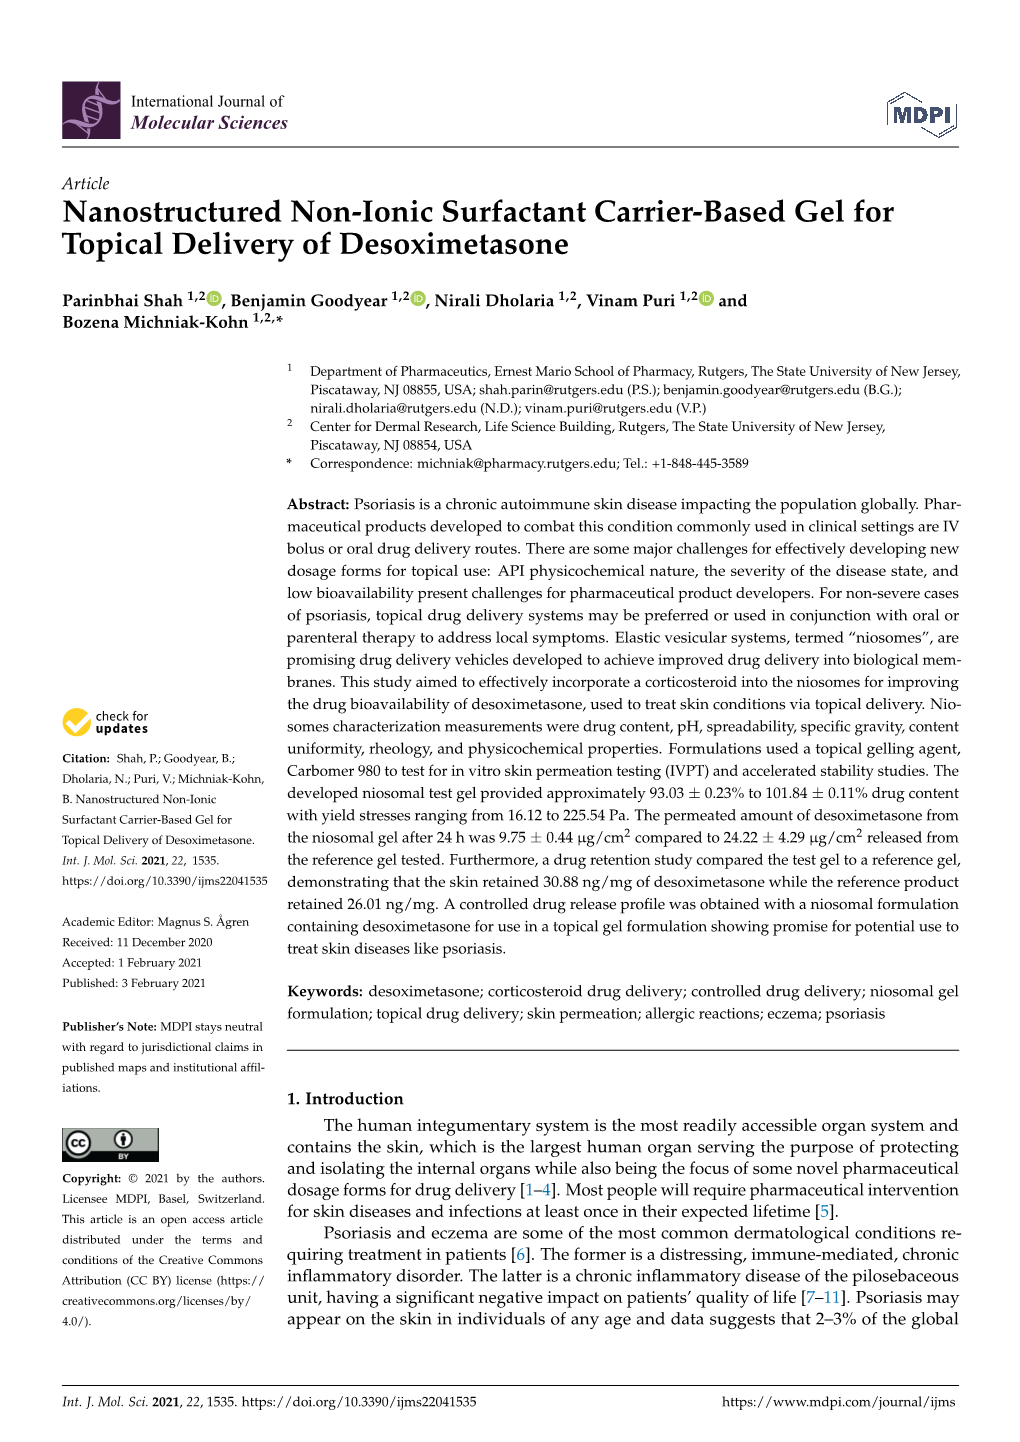 Nanostructured Non-Ionic Surfactant Carrier-Based Gel for Topical Delivery of Desoximetasone